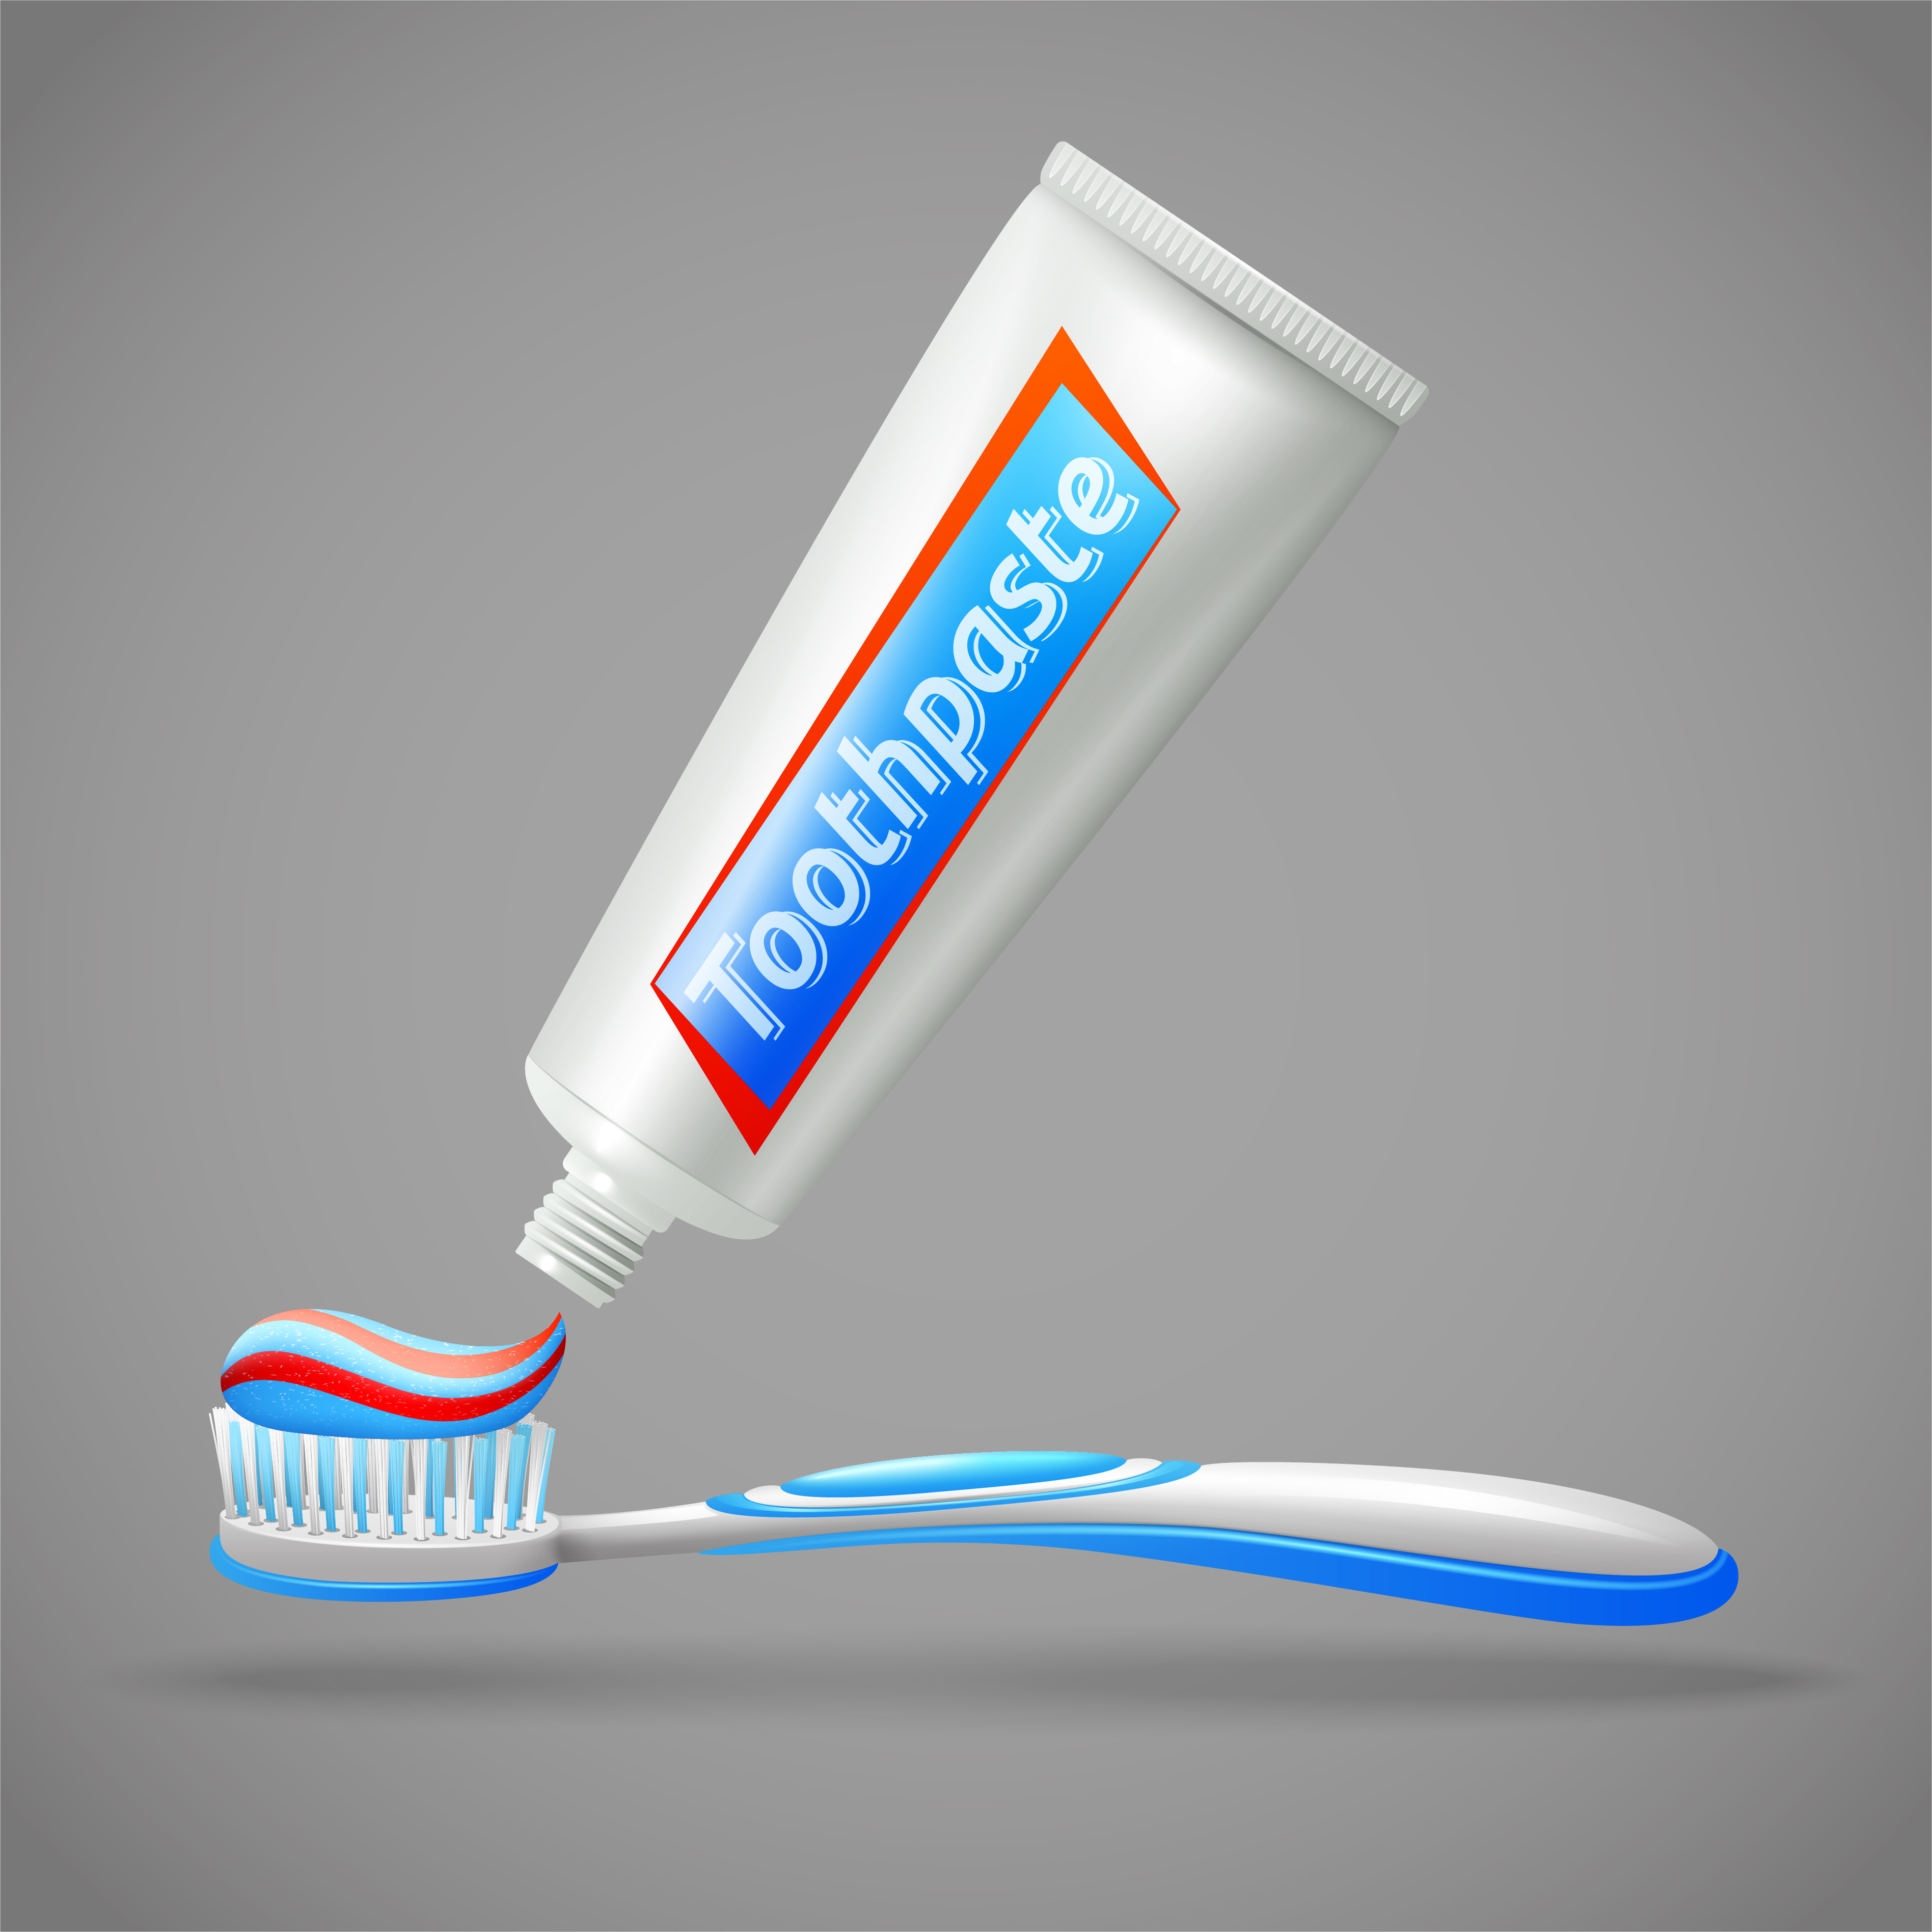 Toothpaste & personal care products